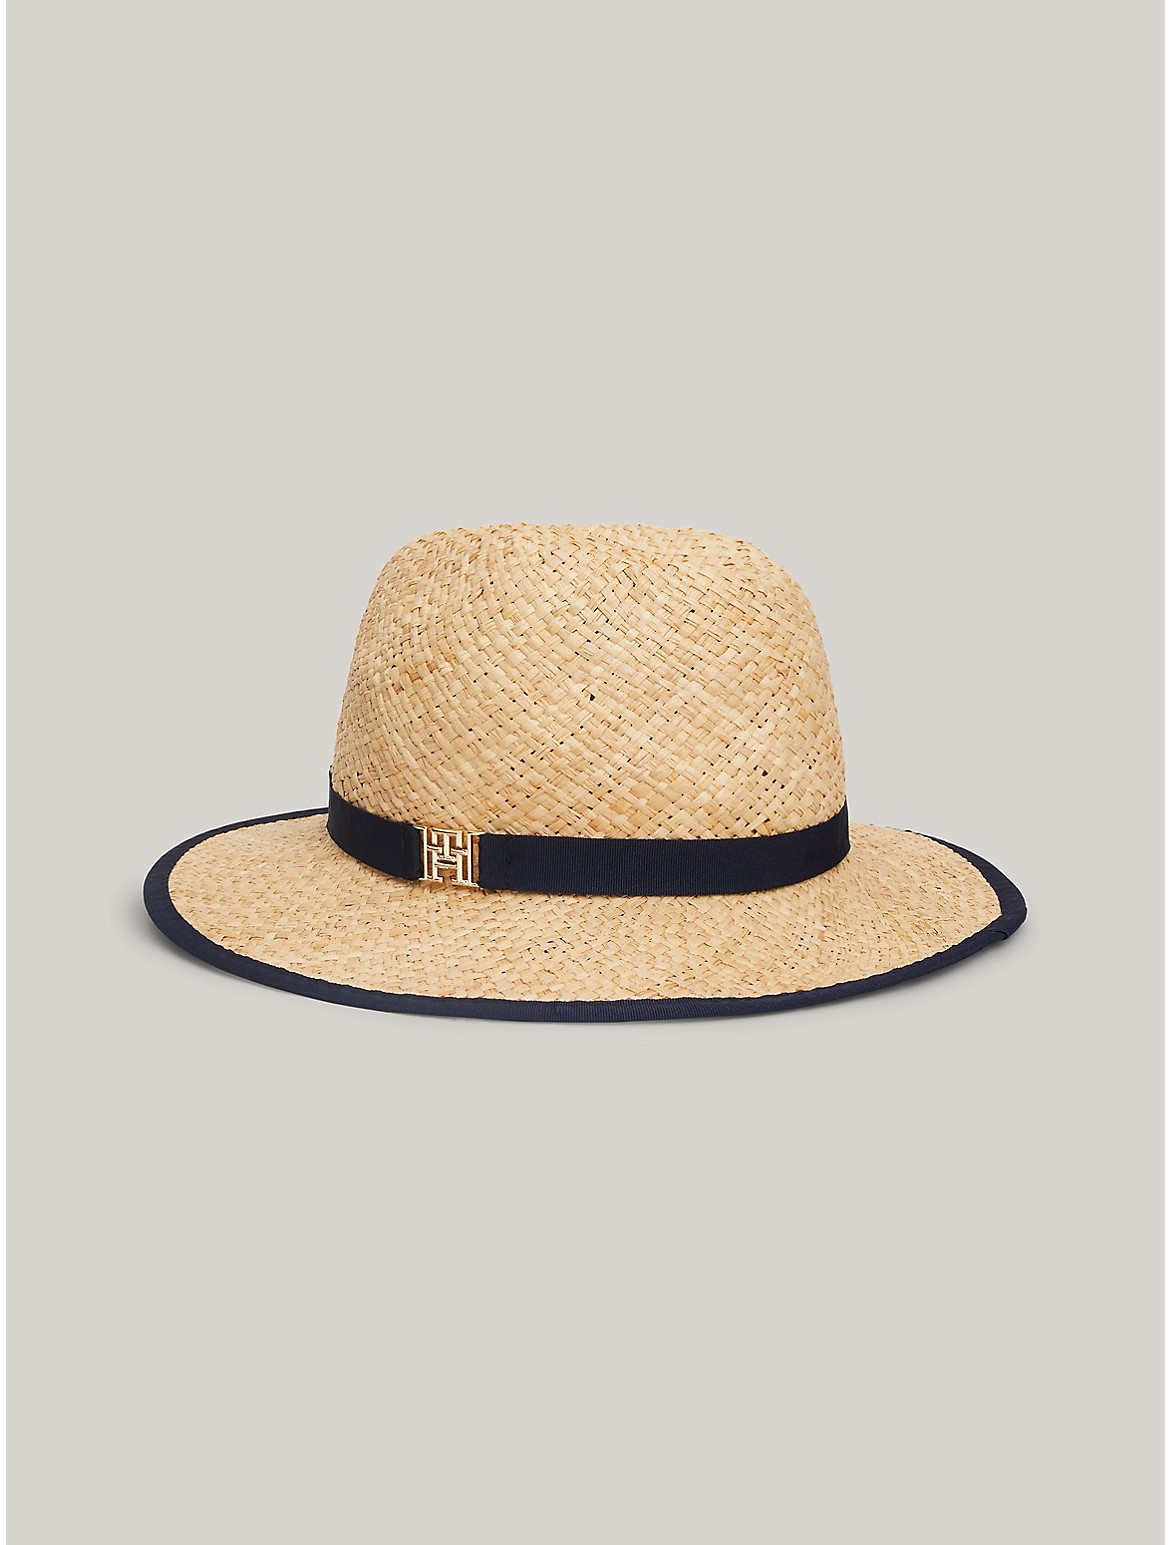 Tommy Hilfiger Th Band Straw Fedora In Calico